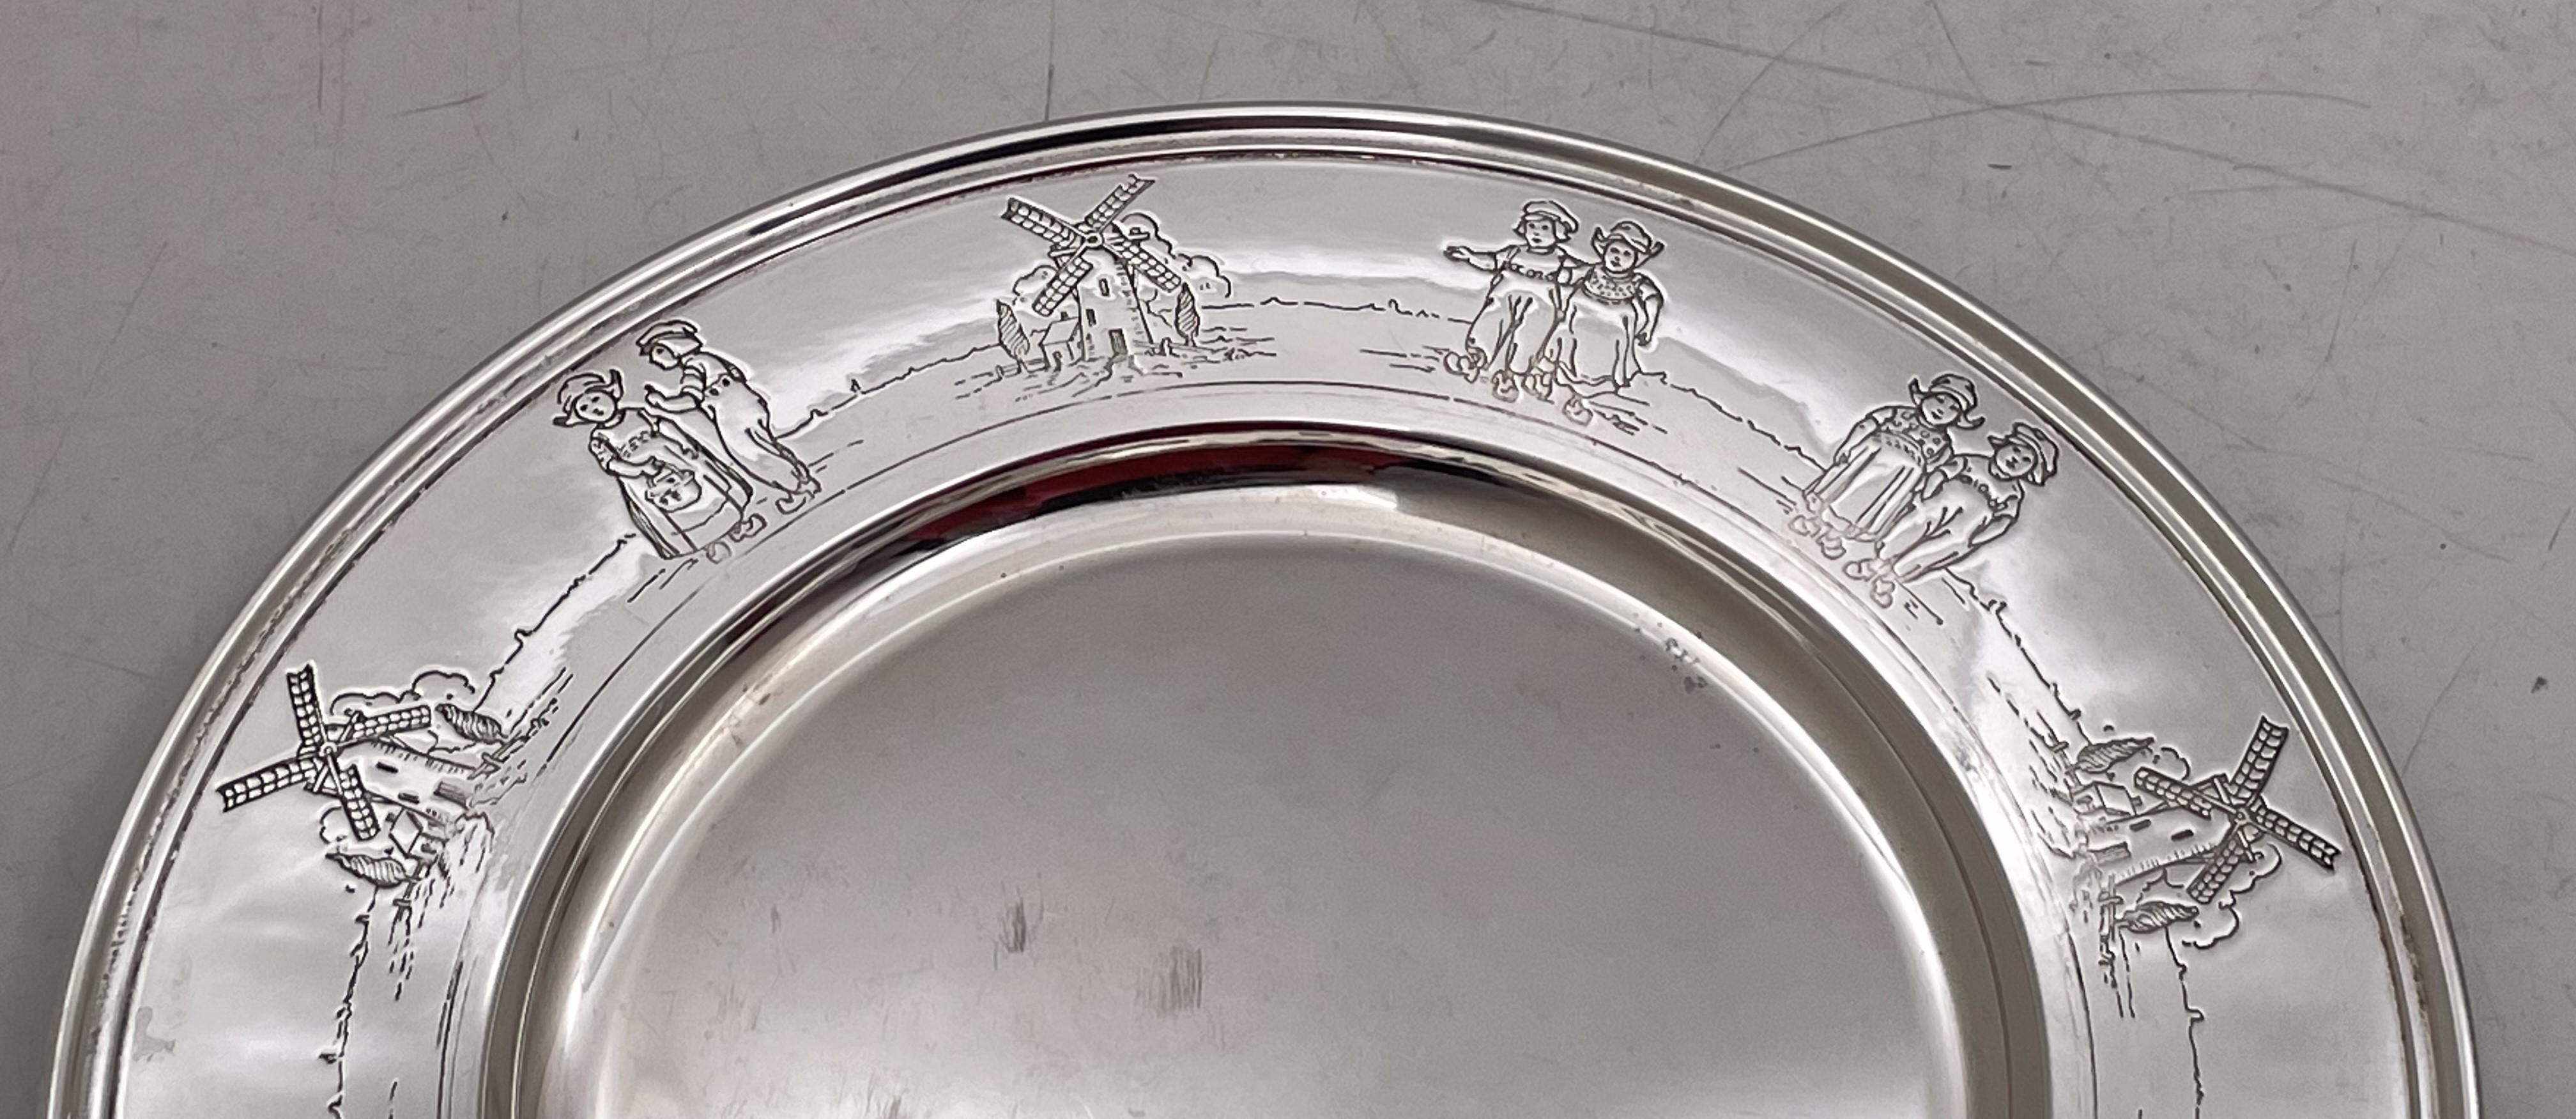 American Gorham Gilt Sterling Silver 1927 Child Bowl & Underplate with Children Motifs For Sale